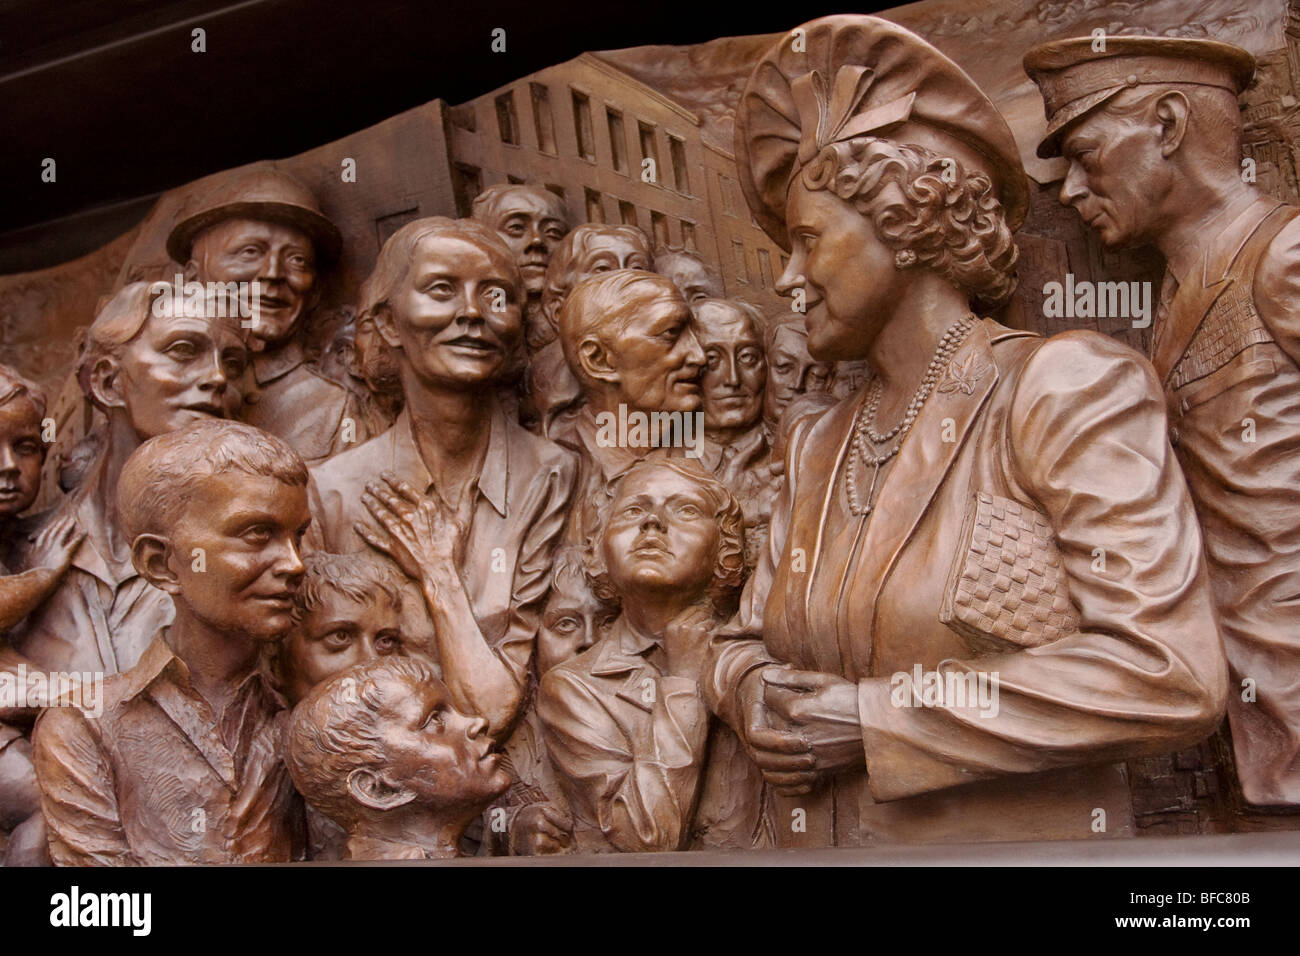 This relief shows the Queen Mother and King George V1 meeting Londoners during the Blitz of the second World War. Stock Photo